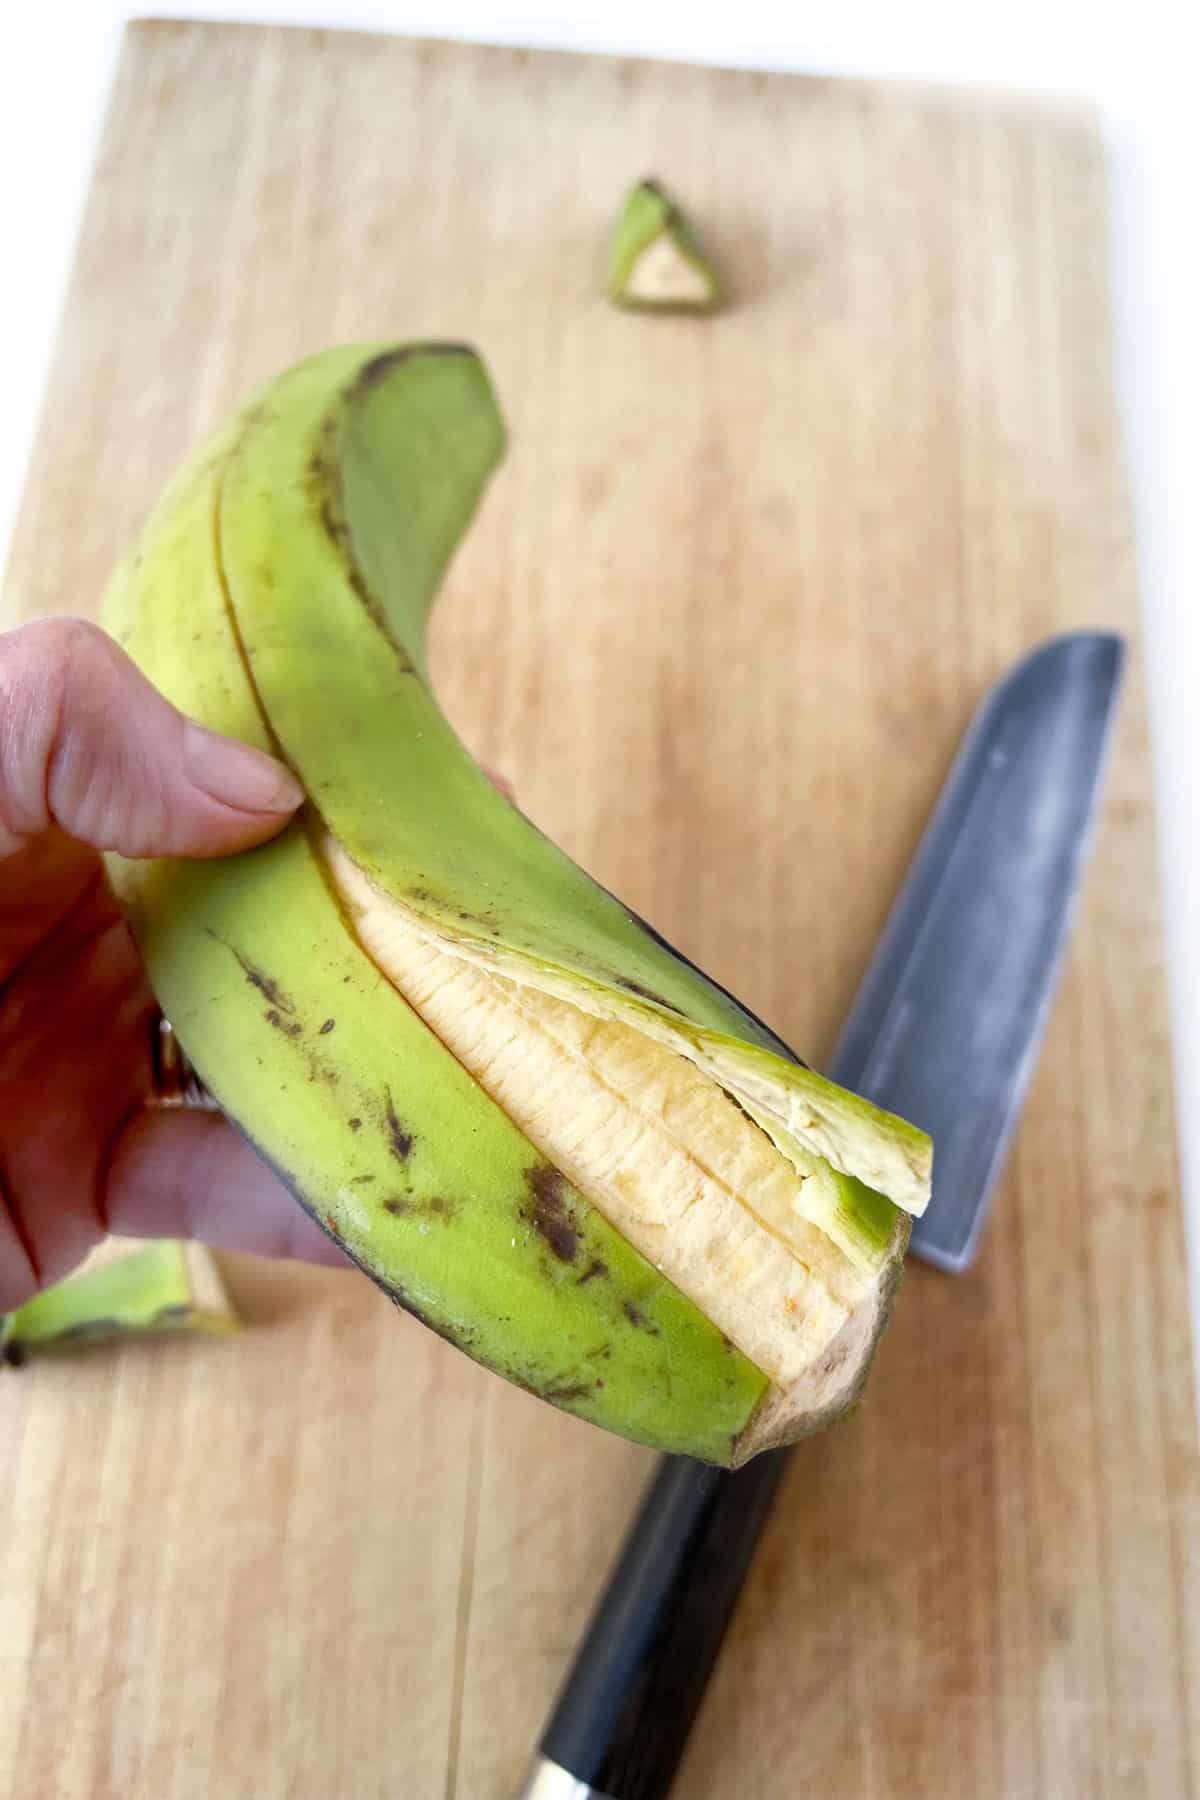 a green plantain with the skin partially peeled off and the flesh showing beneath